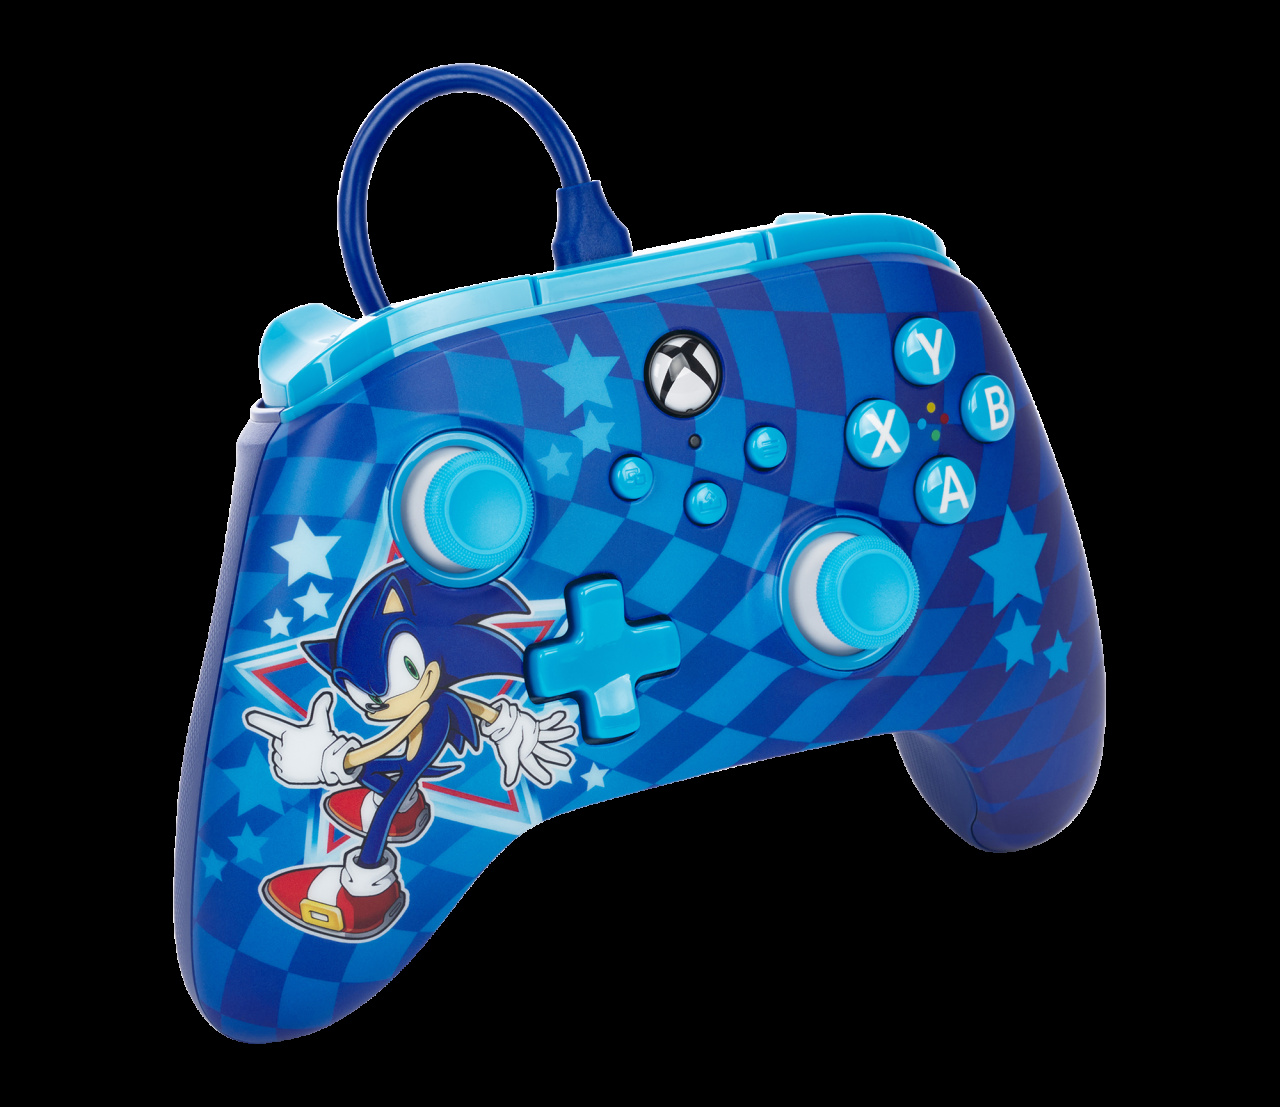 New Sonic gaming accessories from PowerA debut today